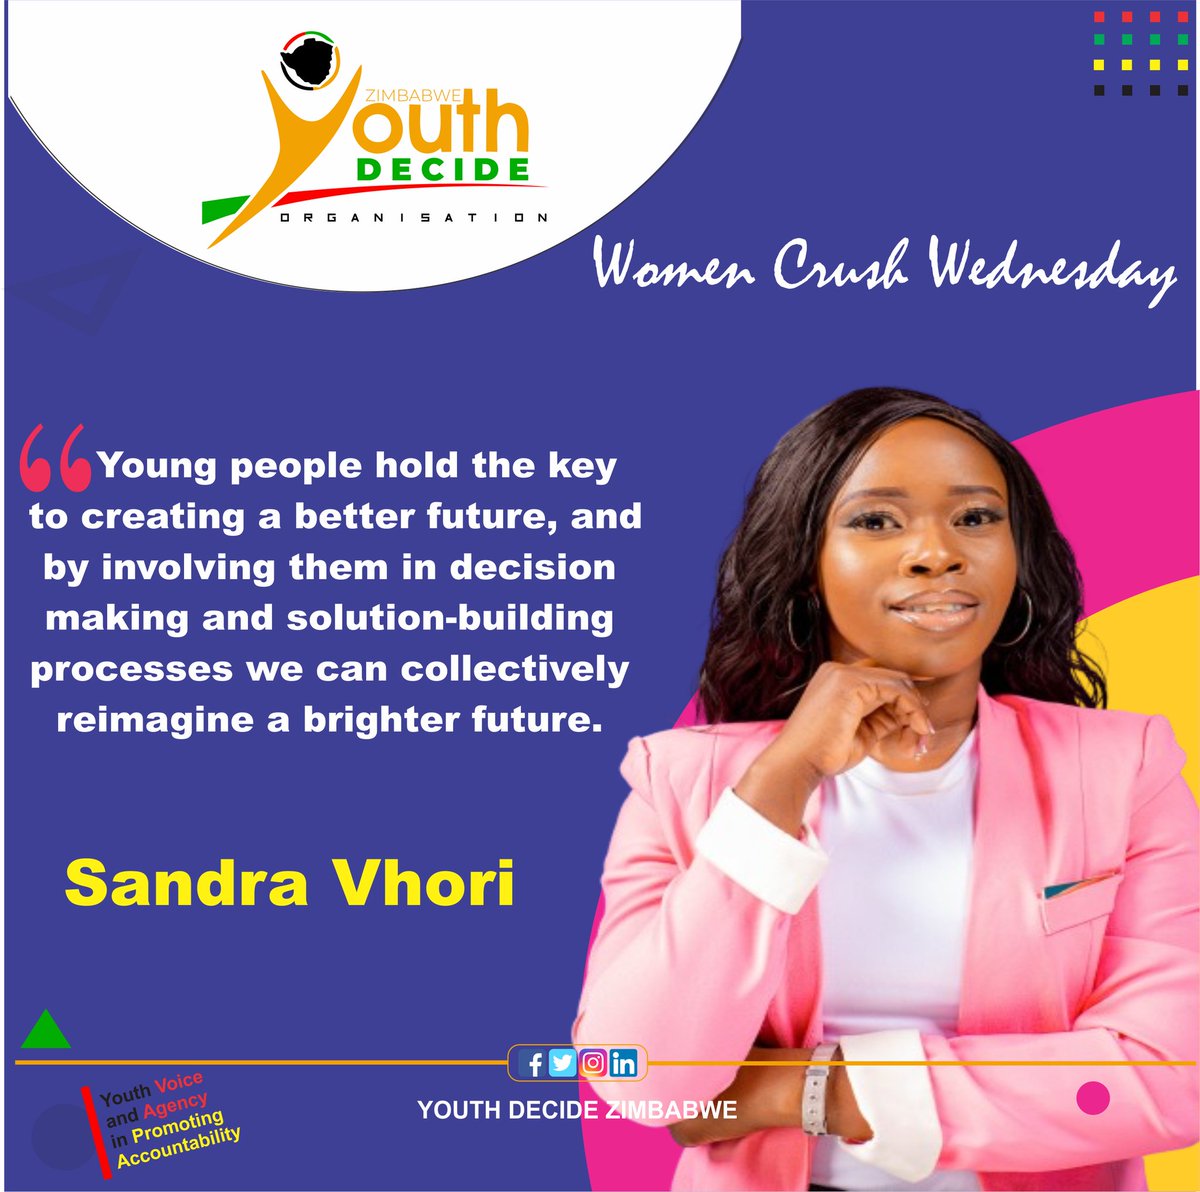 #WomenCrushWednesday Today, we want to shine a spotlight on Sandra, a true champion for youth empowerment. With her unwavering belief that young people should have a say in the decisions that shape their future, Sandra is fearlessly advocating for their rights.